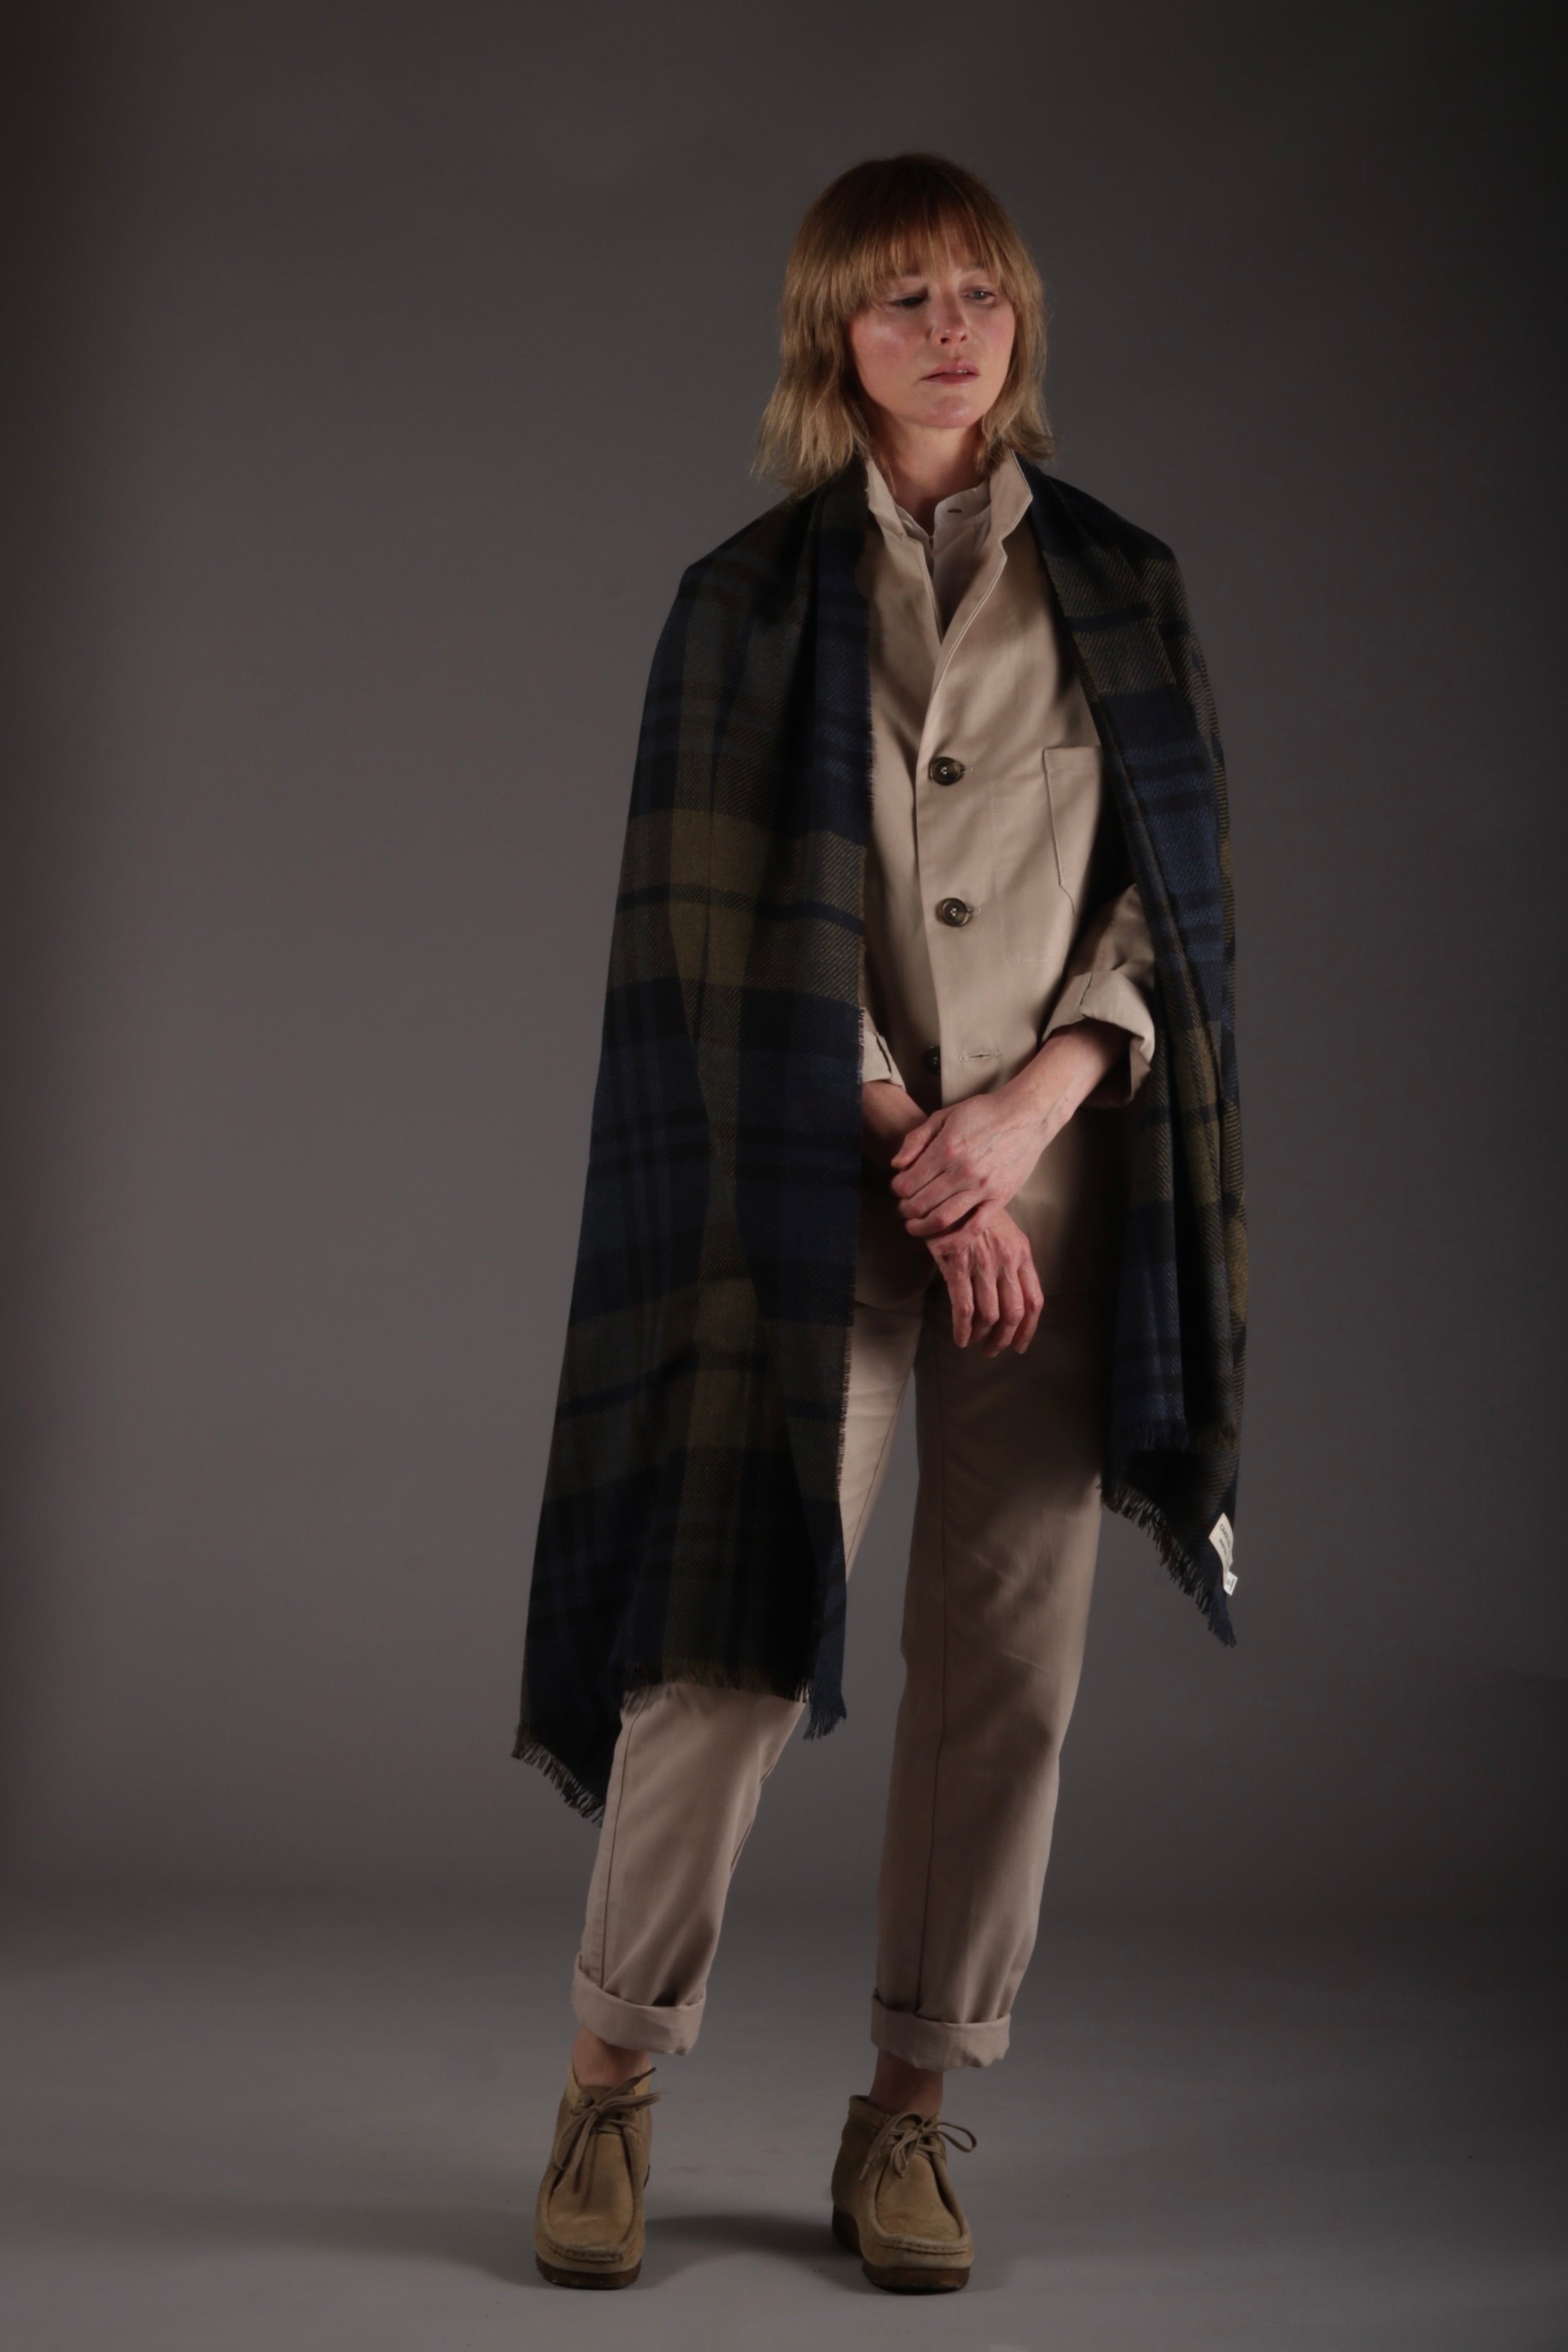 Sienna wears Carrier Company Luxury Cashmere and Lambswool Scarf with Three Button jacket and High Waist Trousers